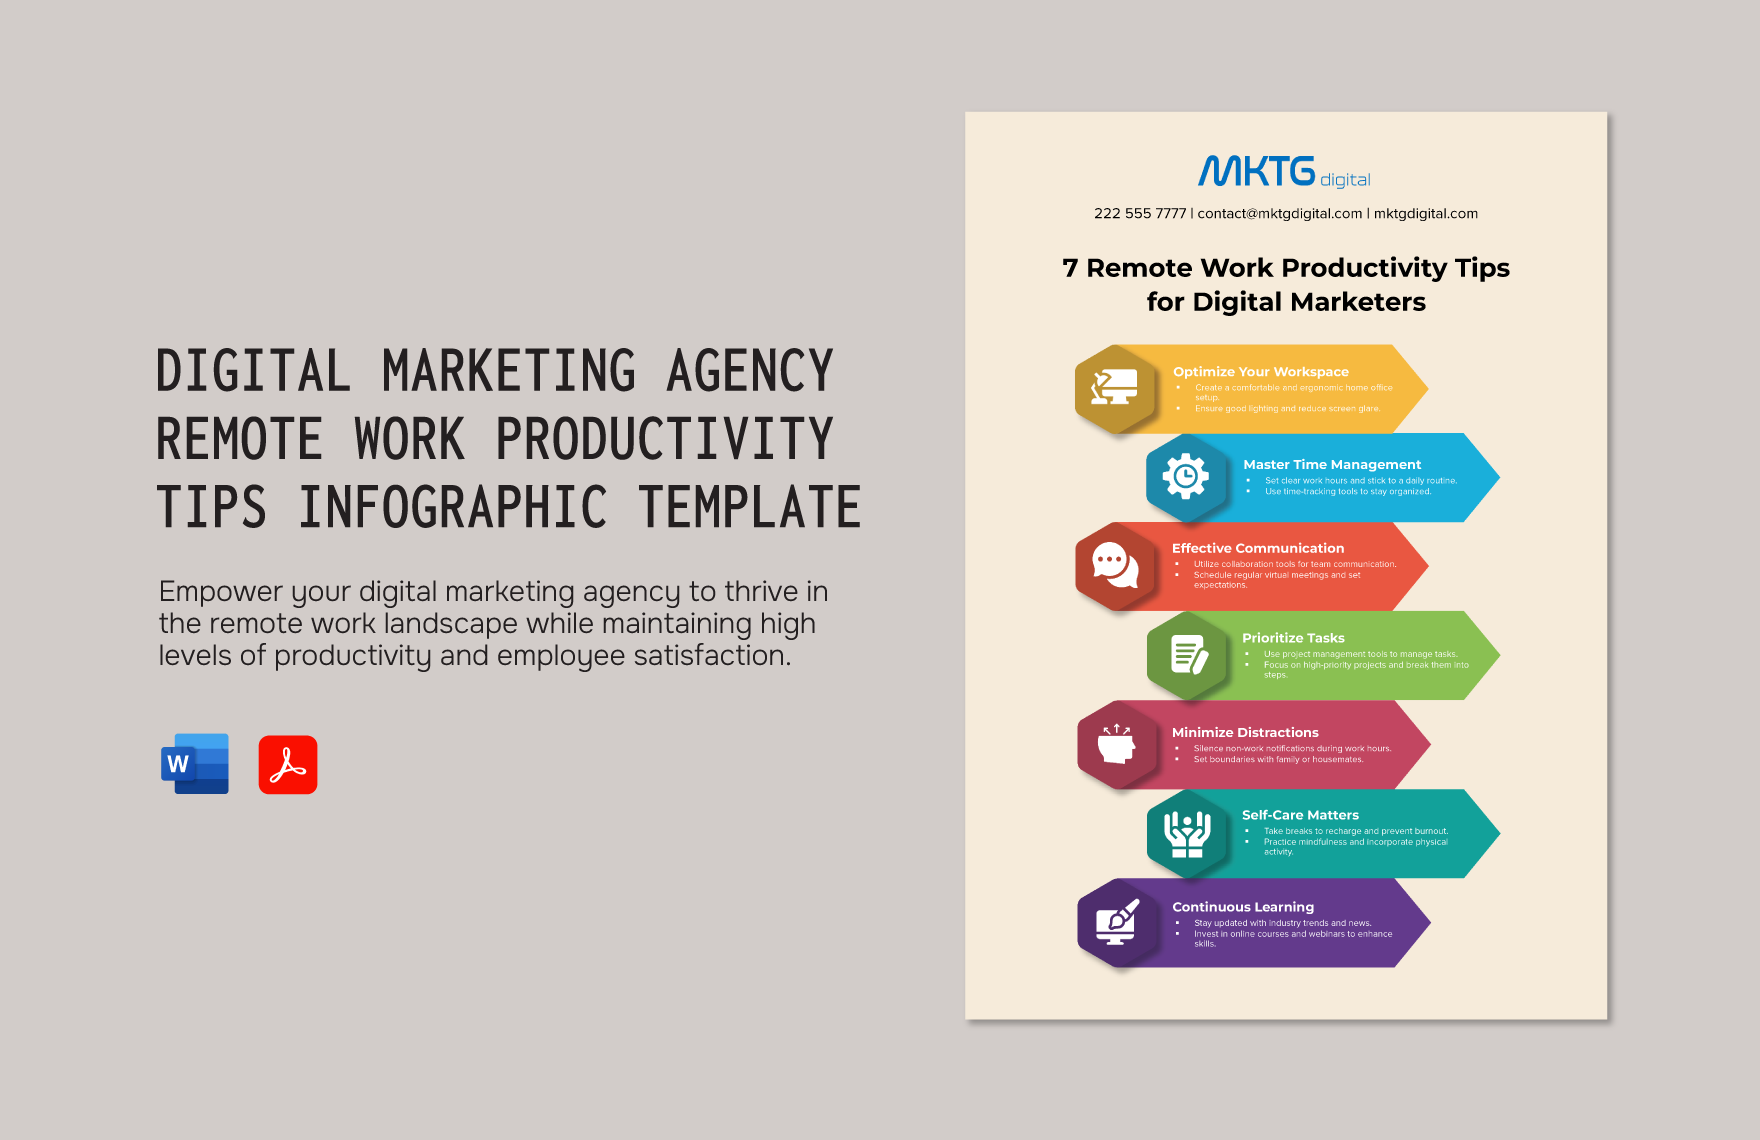 Digital Marketing Agency Remote Work Productivity Tips Infographic Template